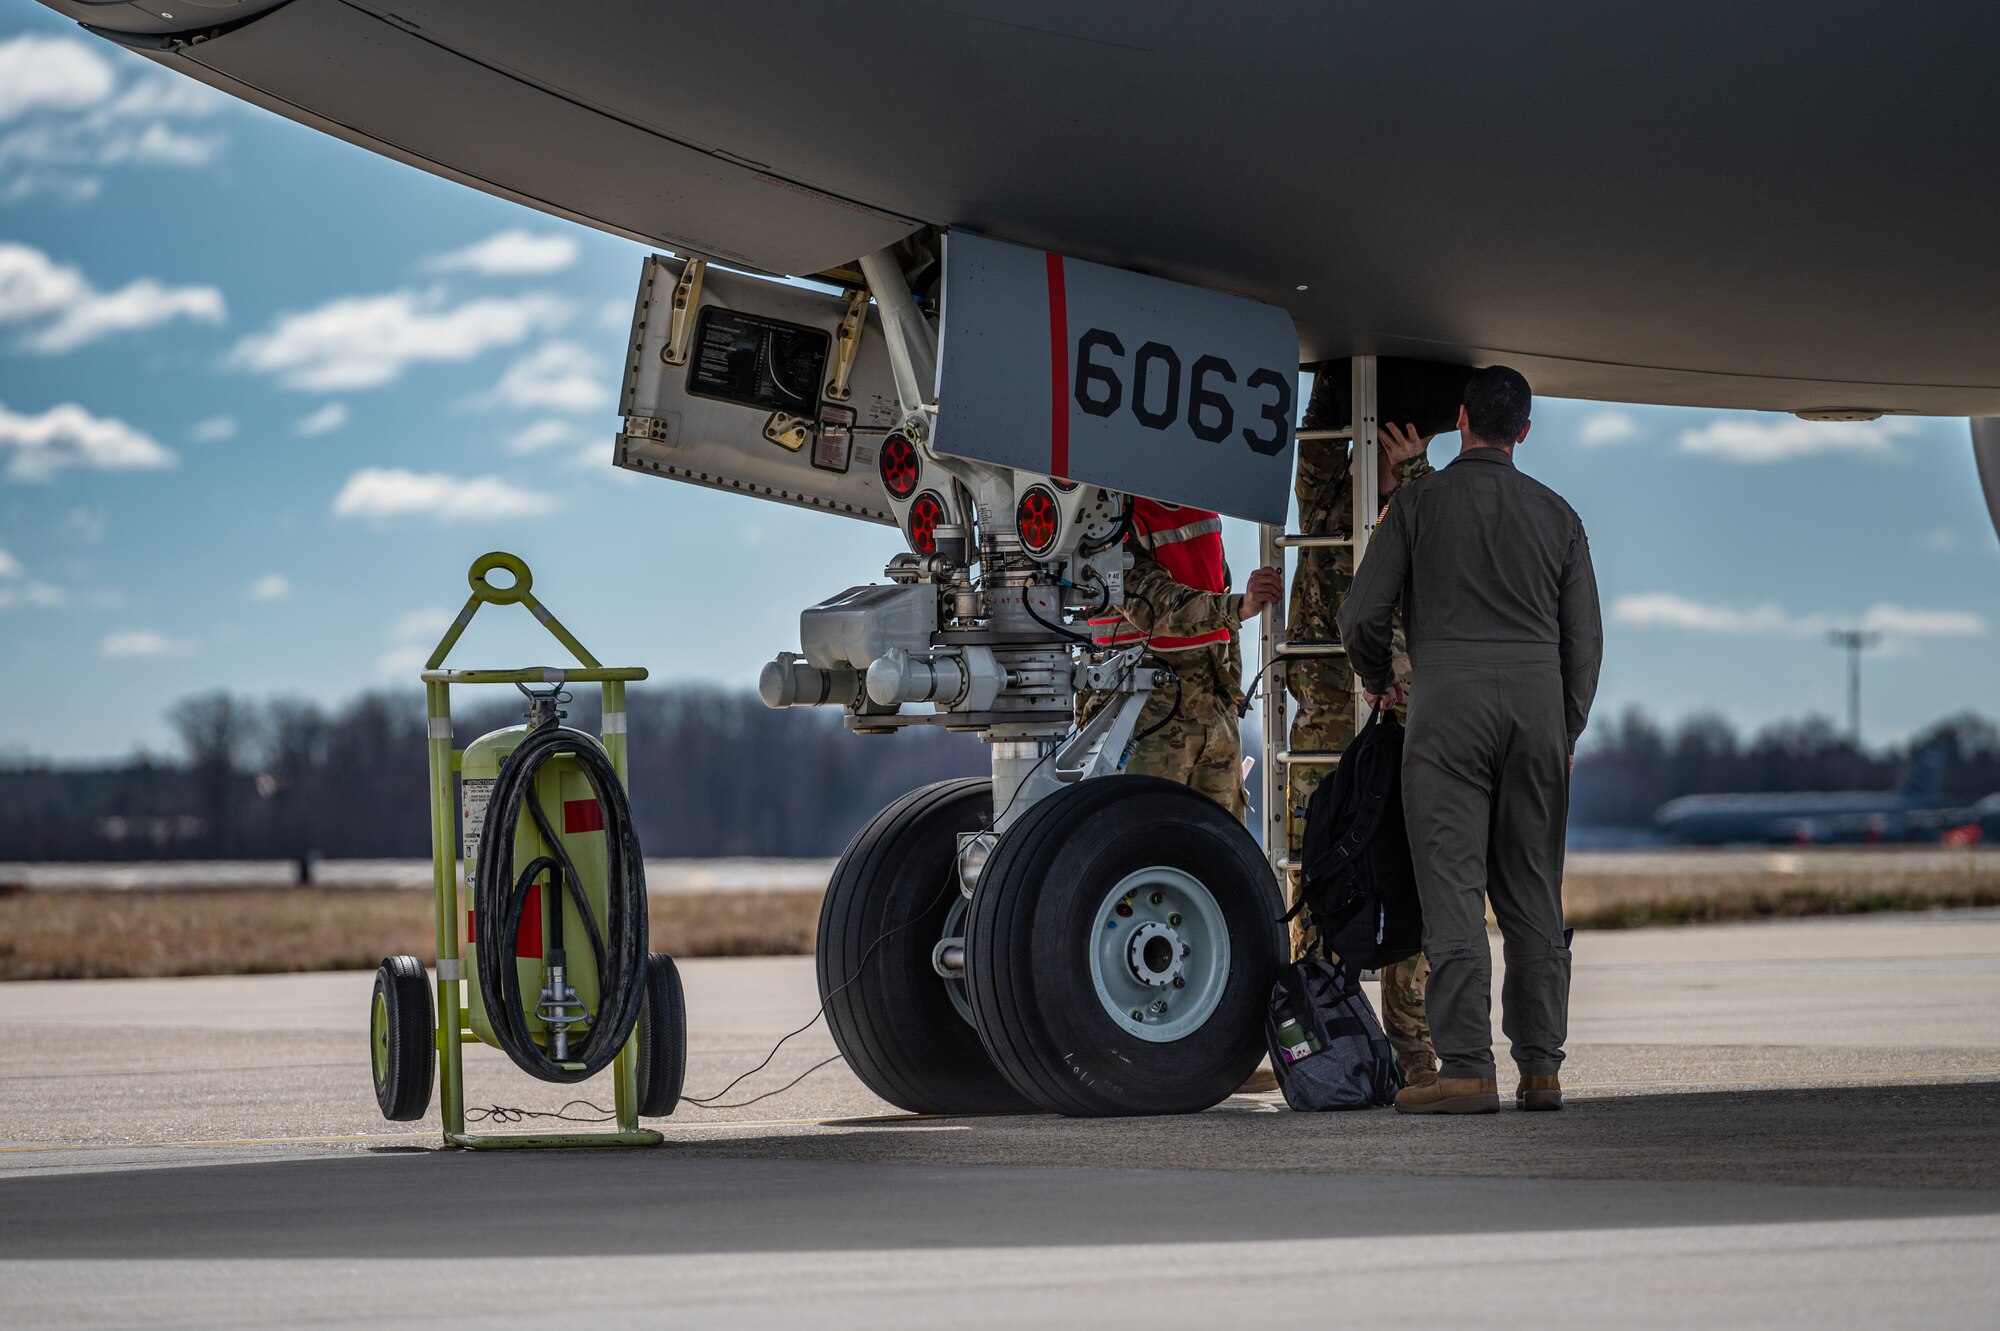 U.S. Air Force Airmen assigned to the 305th Air Mobility Wing conduct an Engine Running Crew Change (ERCC) during exercise White Stag at Joint Base McGuire-Dix-Lakehurst, N.J., March 8, 2023.